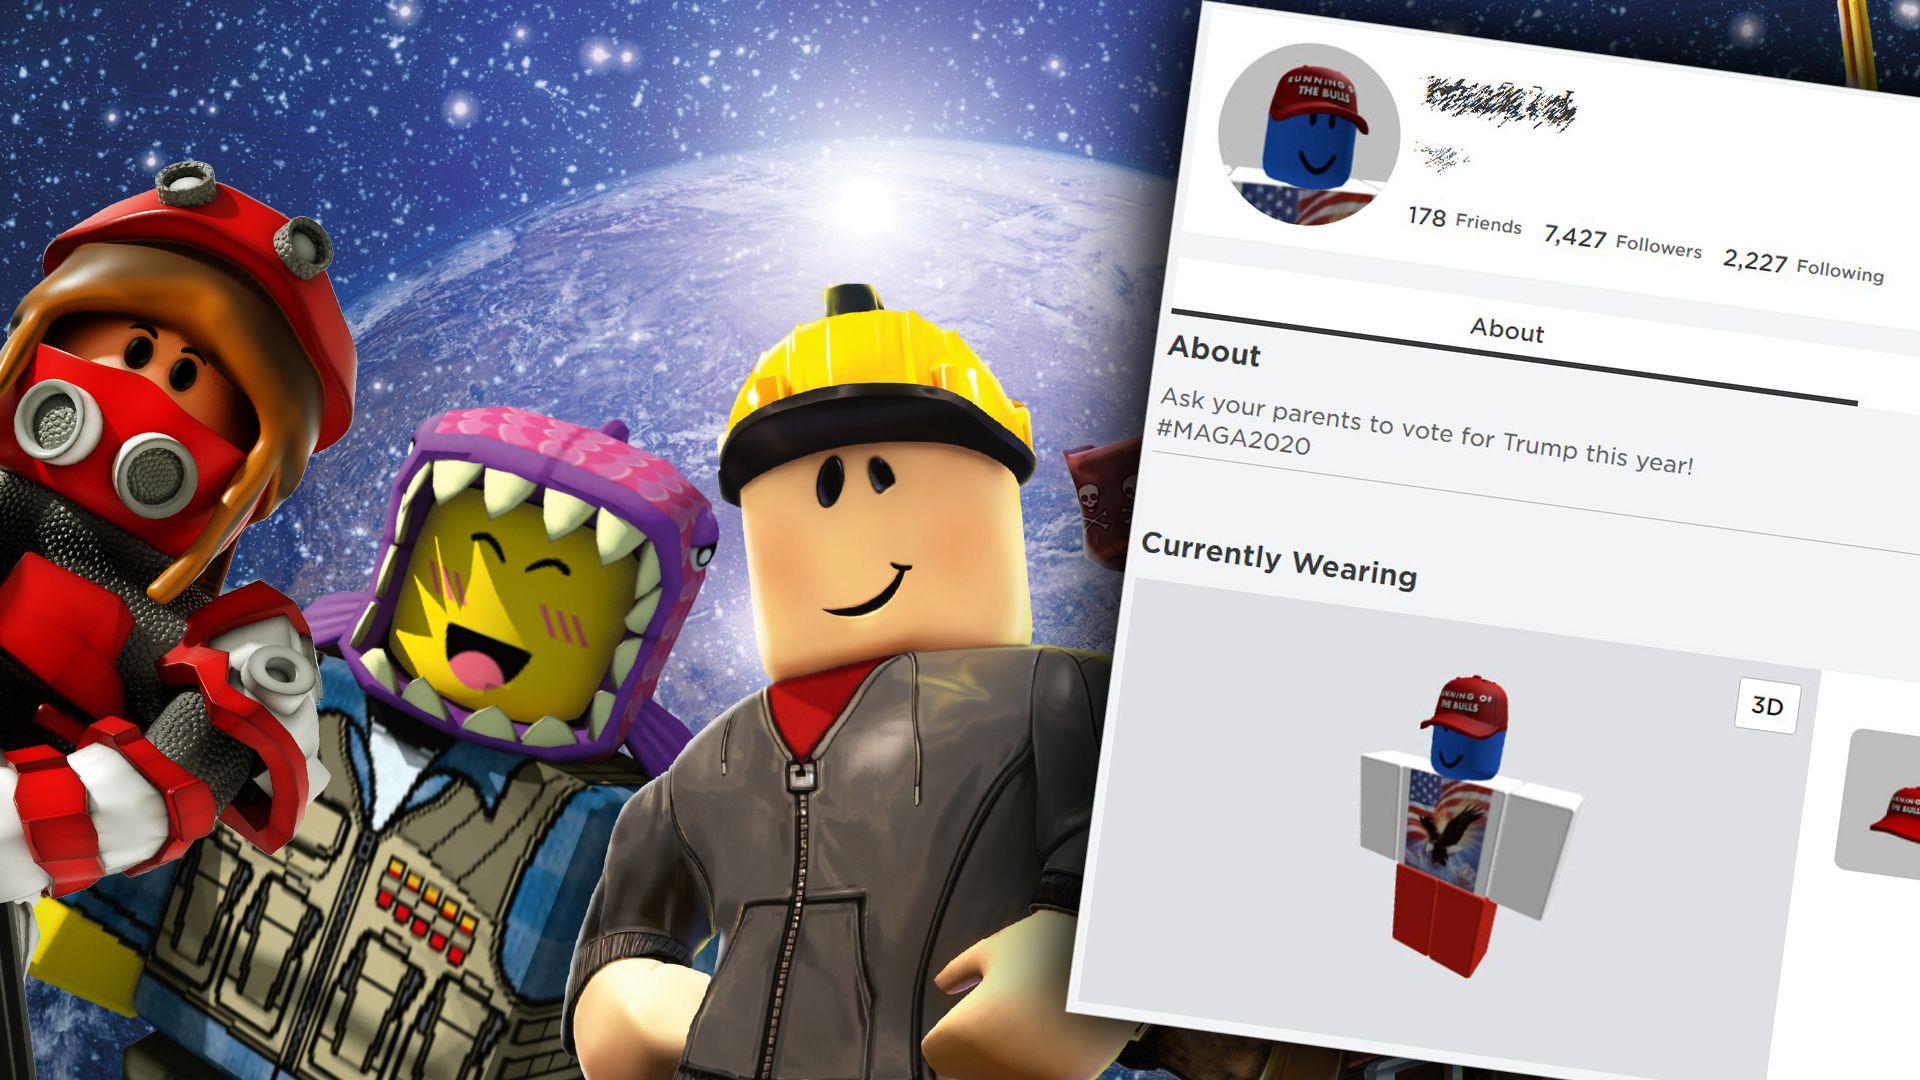 Hackers deface Roblox accounts with pro-Trump messages